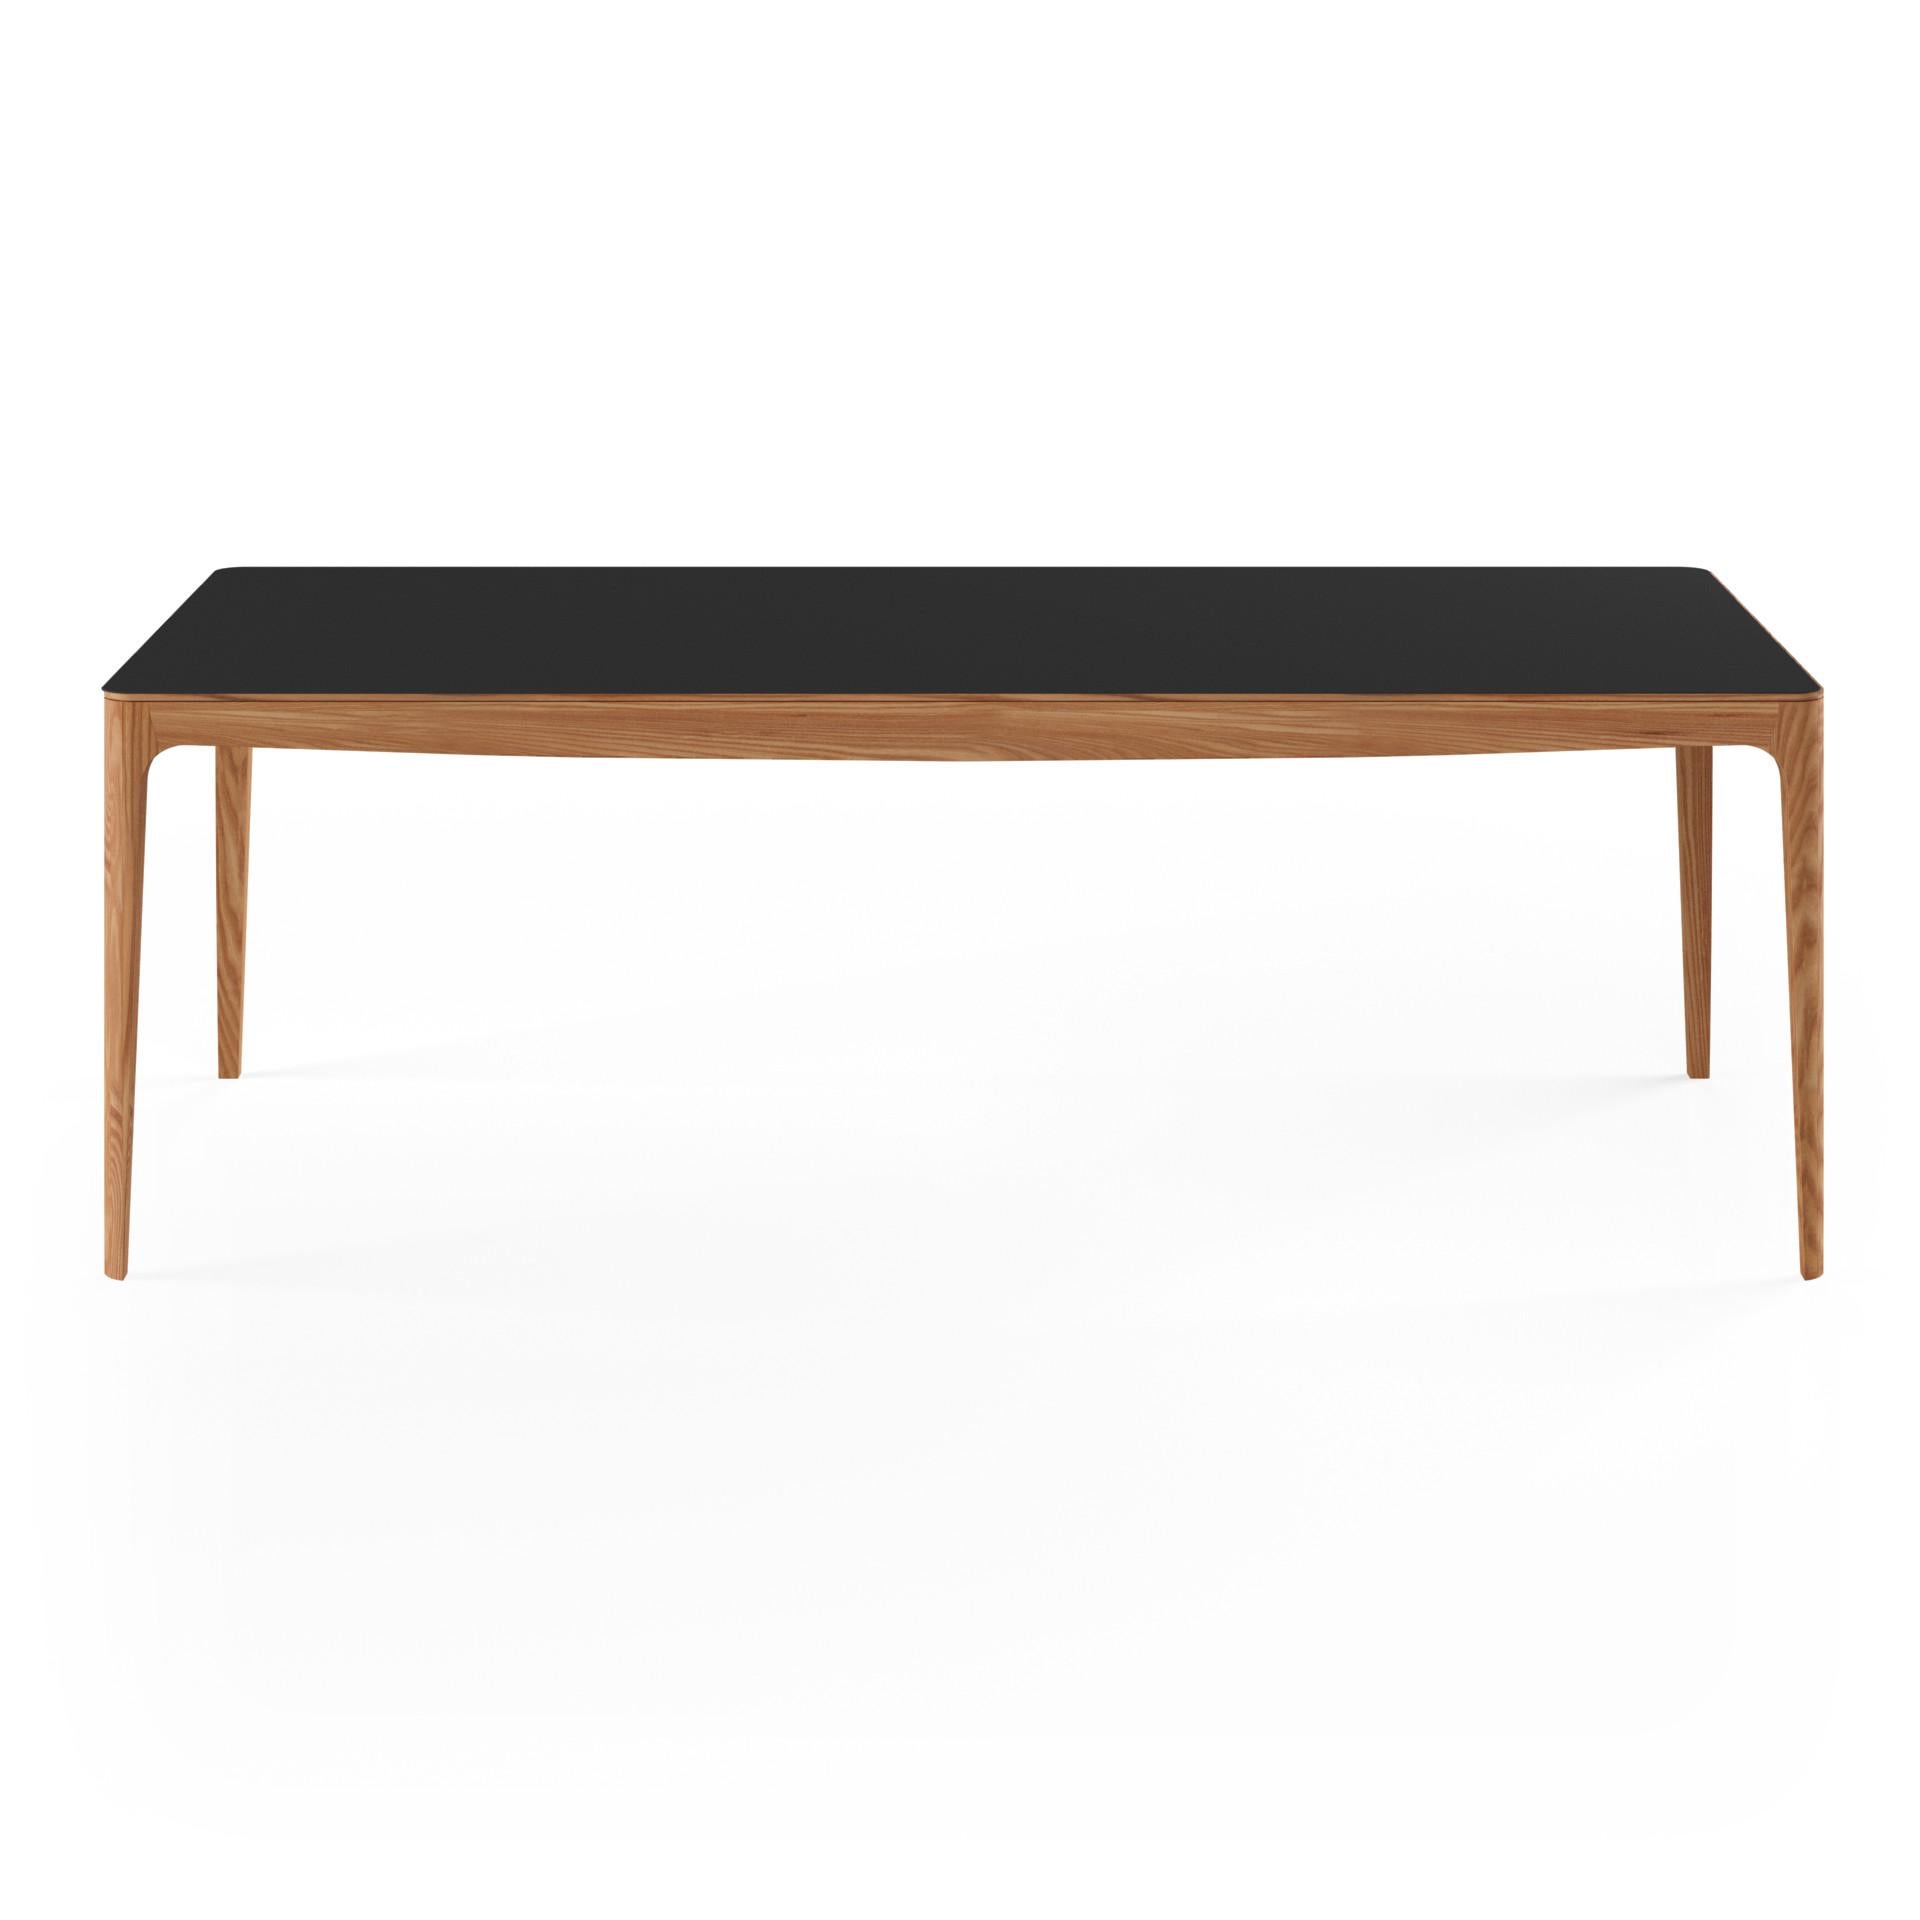 The Ro table series combines Classic cabinetmaker traditions with a clean expression that fits a modern setting.
In close collaboration with designer, Hans Sandgren Jakobsen, we have developed the table, GM 3700 Ro. Hans Sandgren has designed a